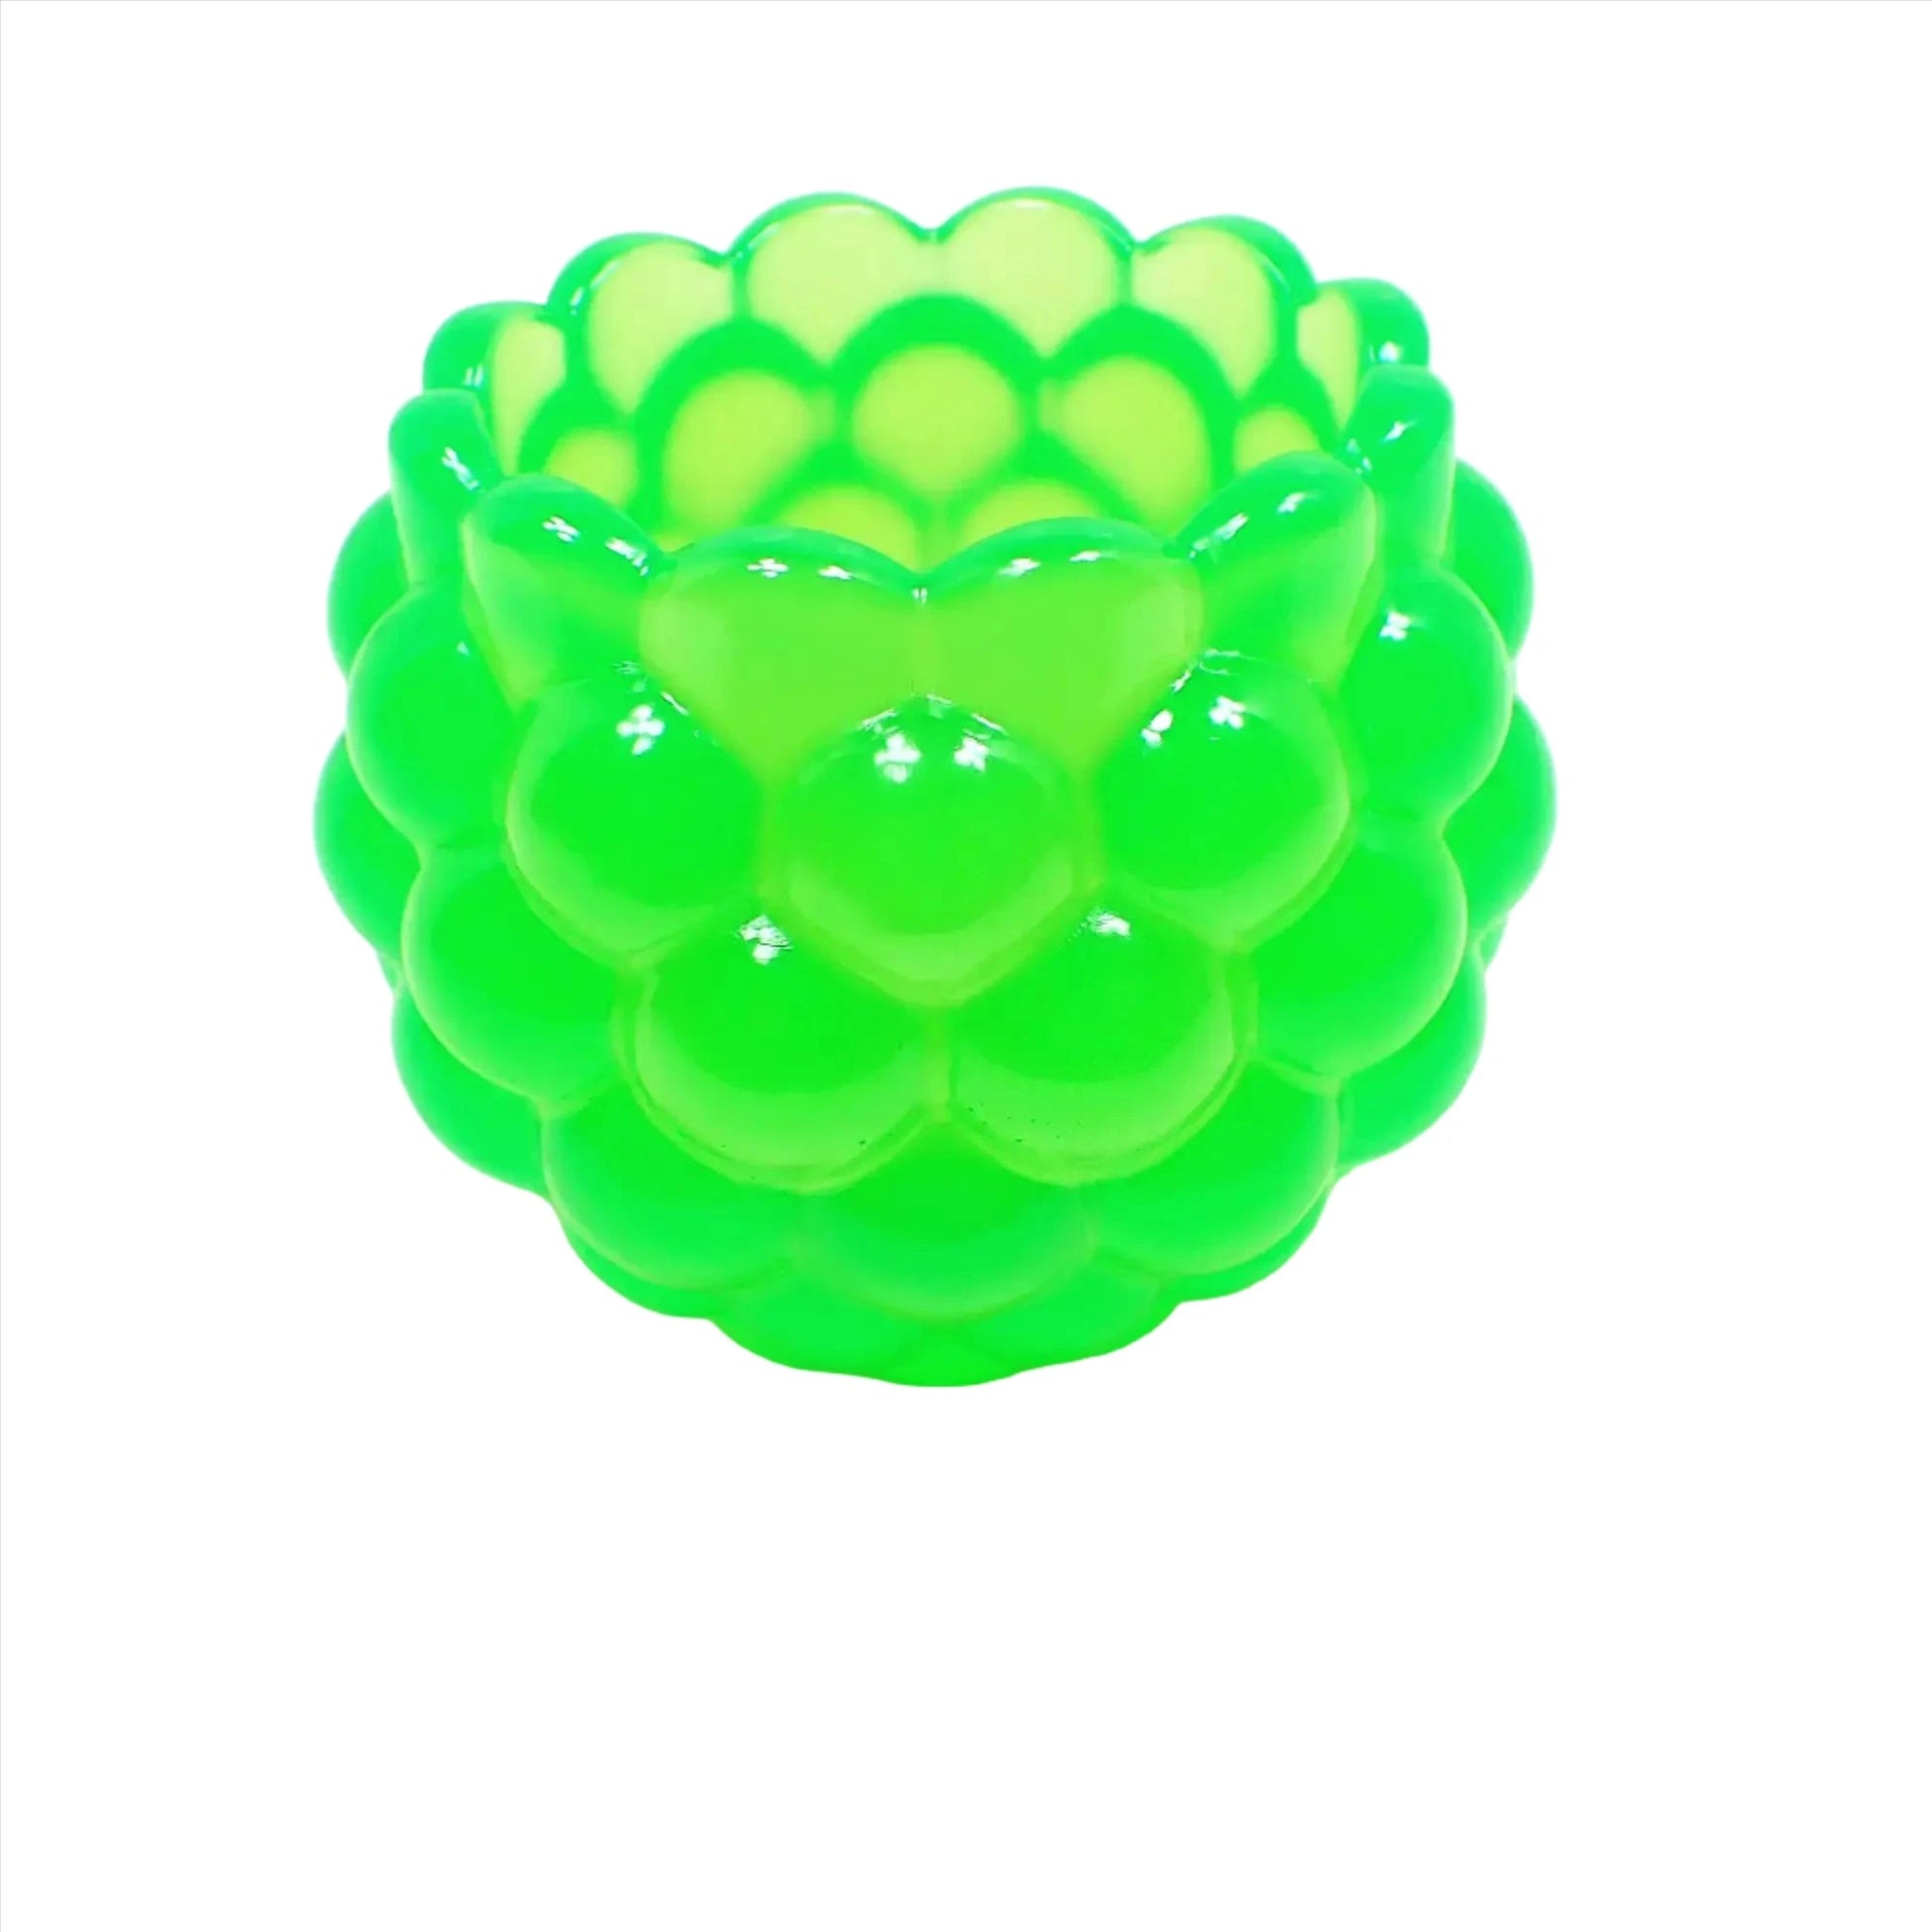 Side view of the handmade resin decorative bowl. The resin is bright neon green in color. It has a rounded shape with a bumpy round ball textured on the outside. The top tapers slightly and has a scalloped edge.